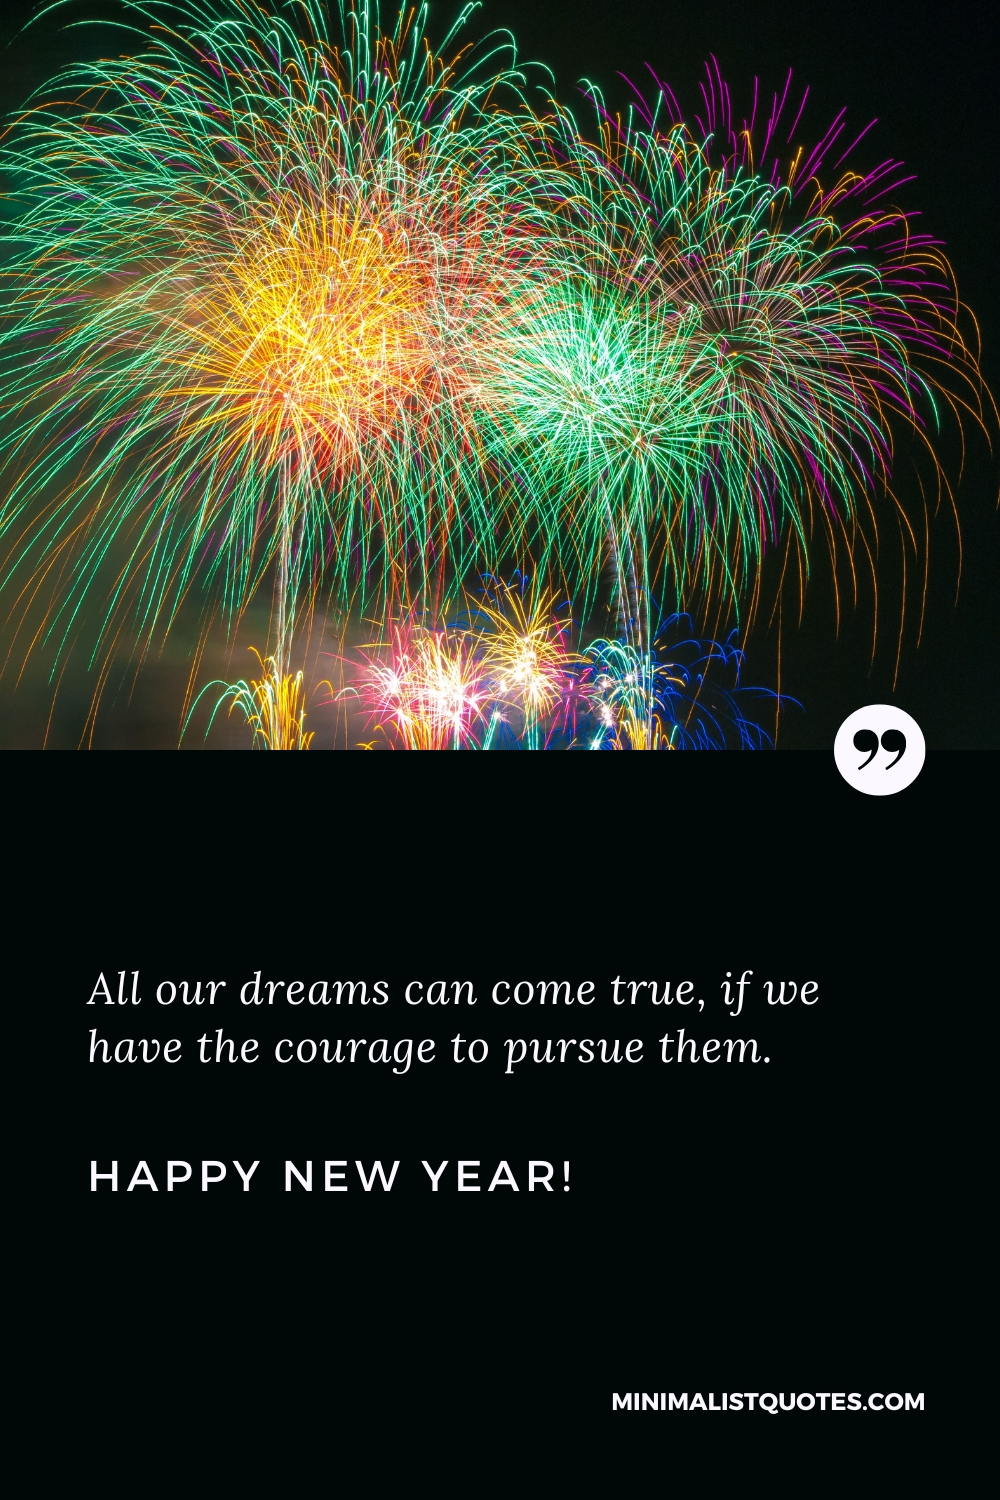 Happy New Year Wishes: All our dreams can come true, if we have the courage to pursue them. Happy New Year!